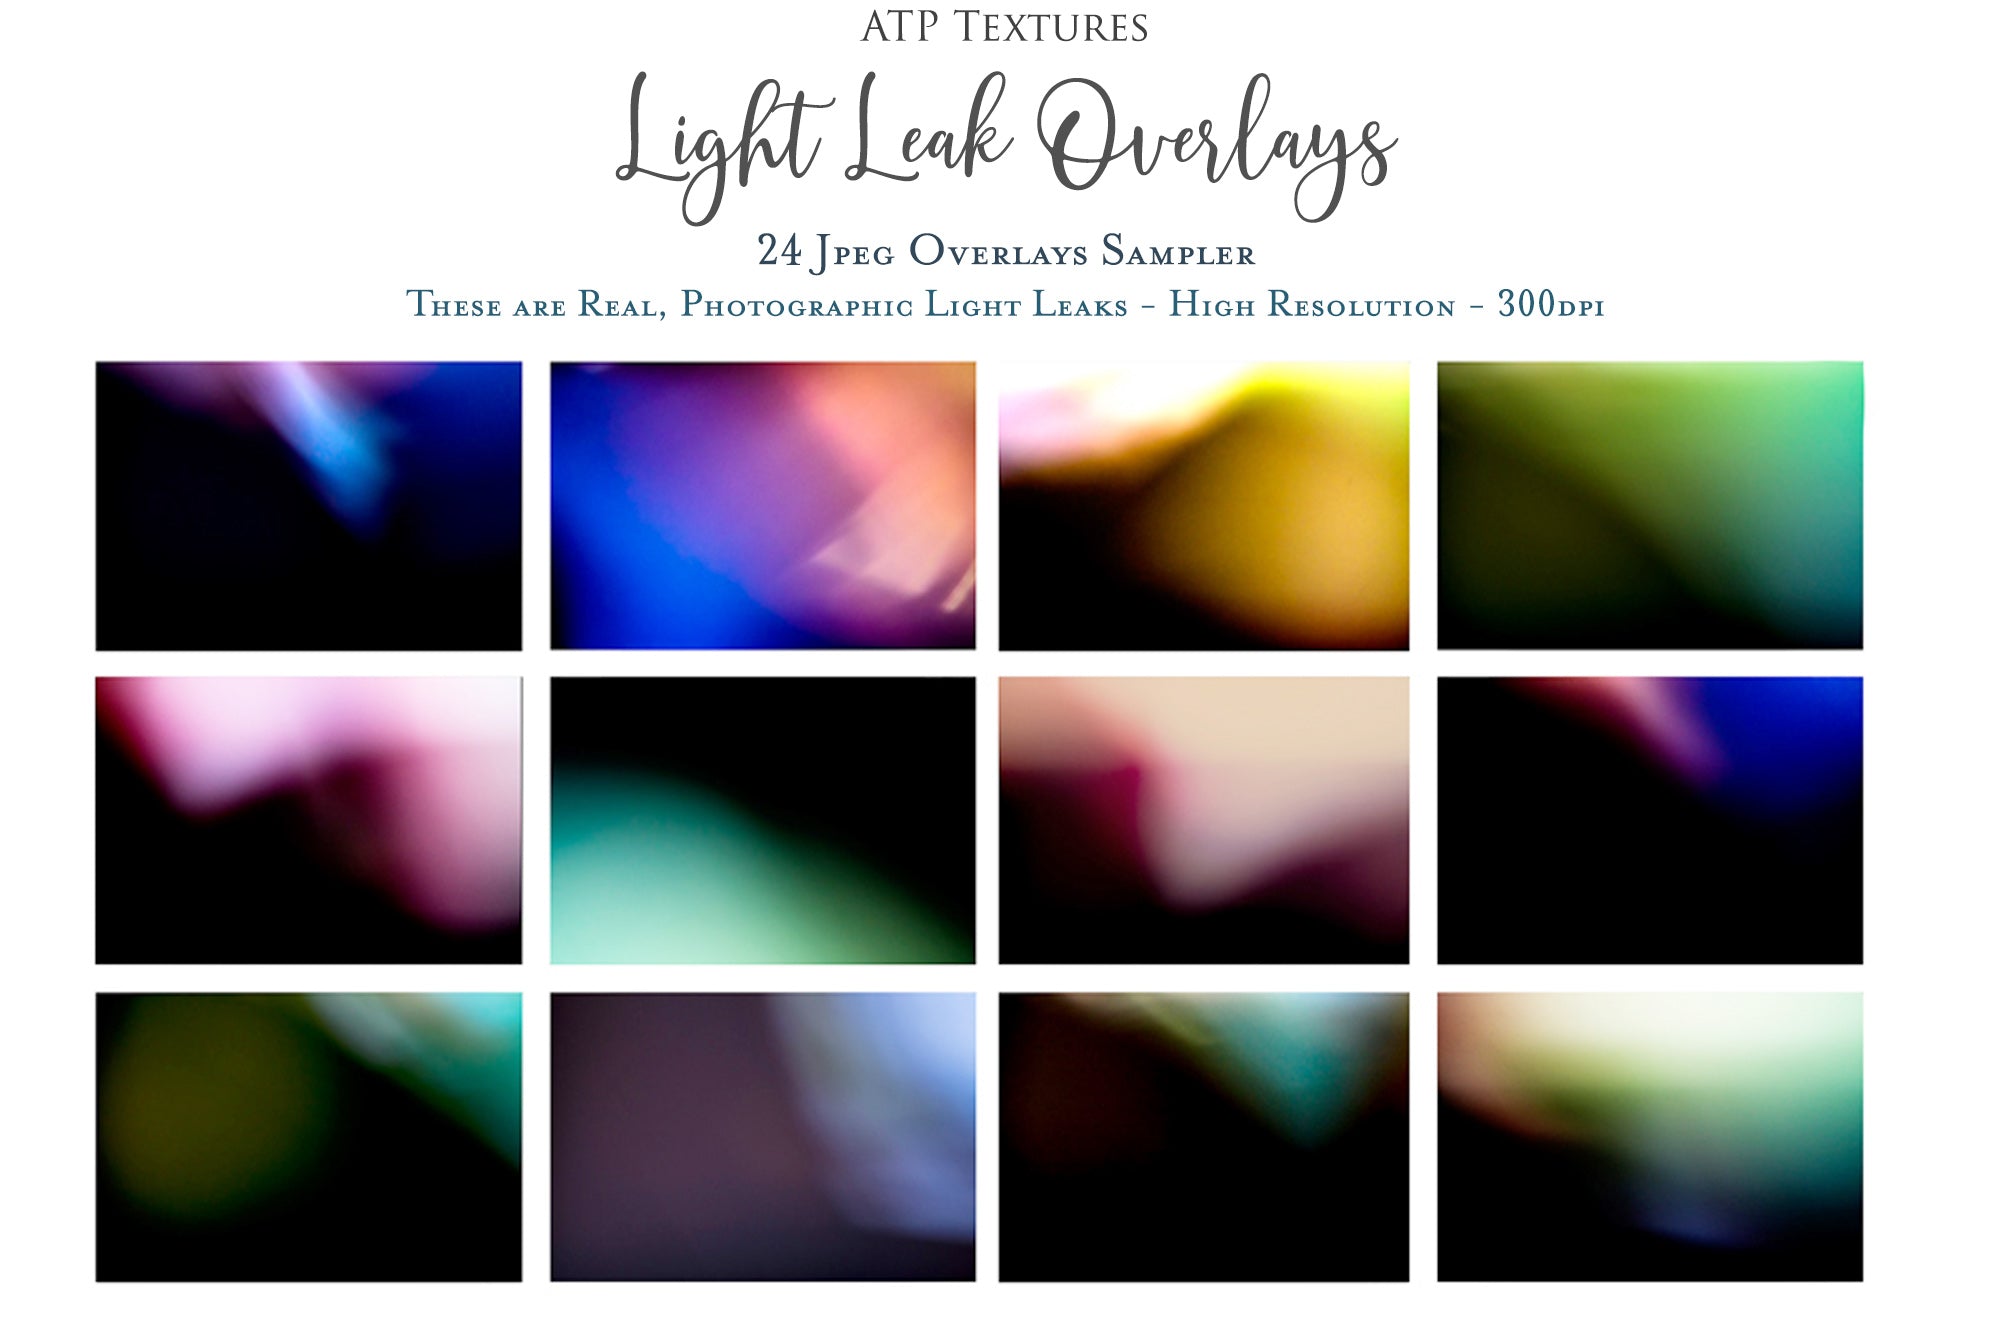 Light Leak Overlays for photography. Colour, fine art photo editing. High resolution. Graphic colour assets for photographers. Digital download design. Peek through soft colour add on. Bundles for inspiration. Beautiful design. Creative Photo Professional quality. Atp textures.